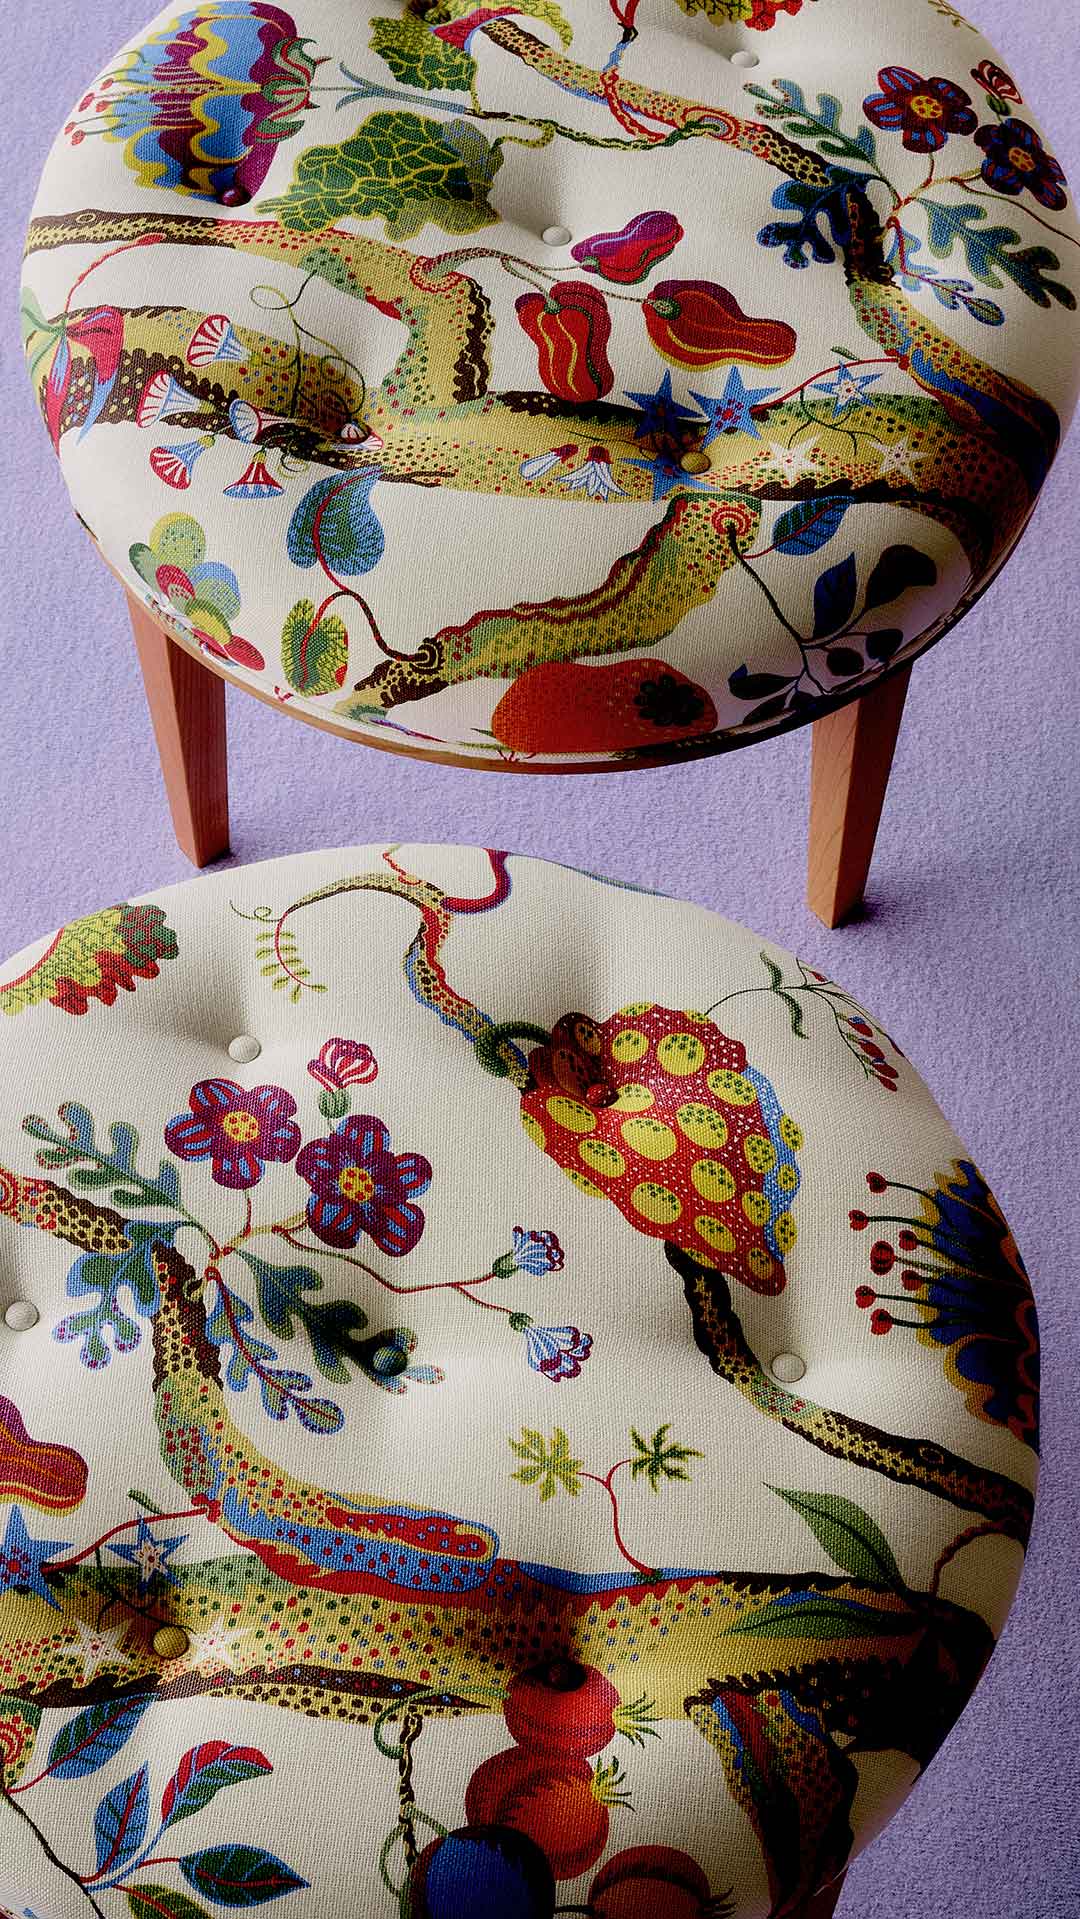 Originally designed by Josef Frank, the textile design contrasts sharply with the standardized interiors